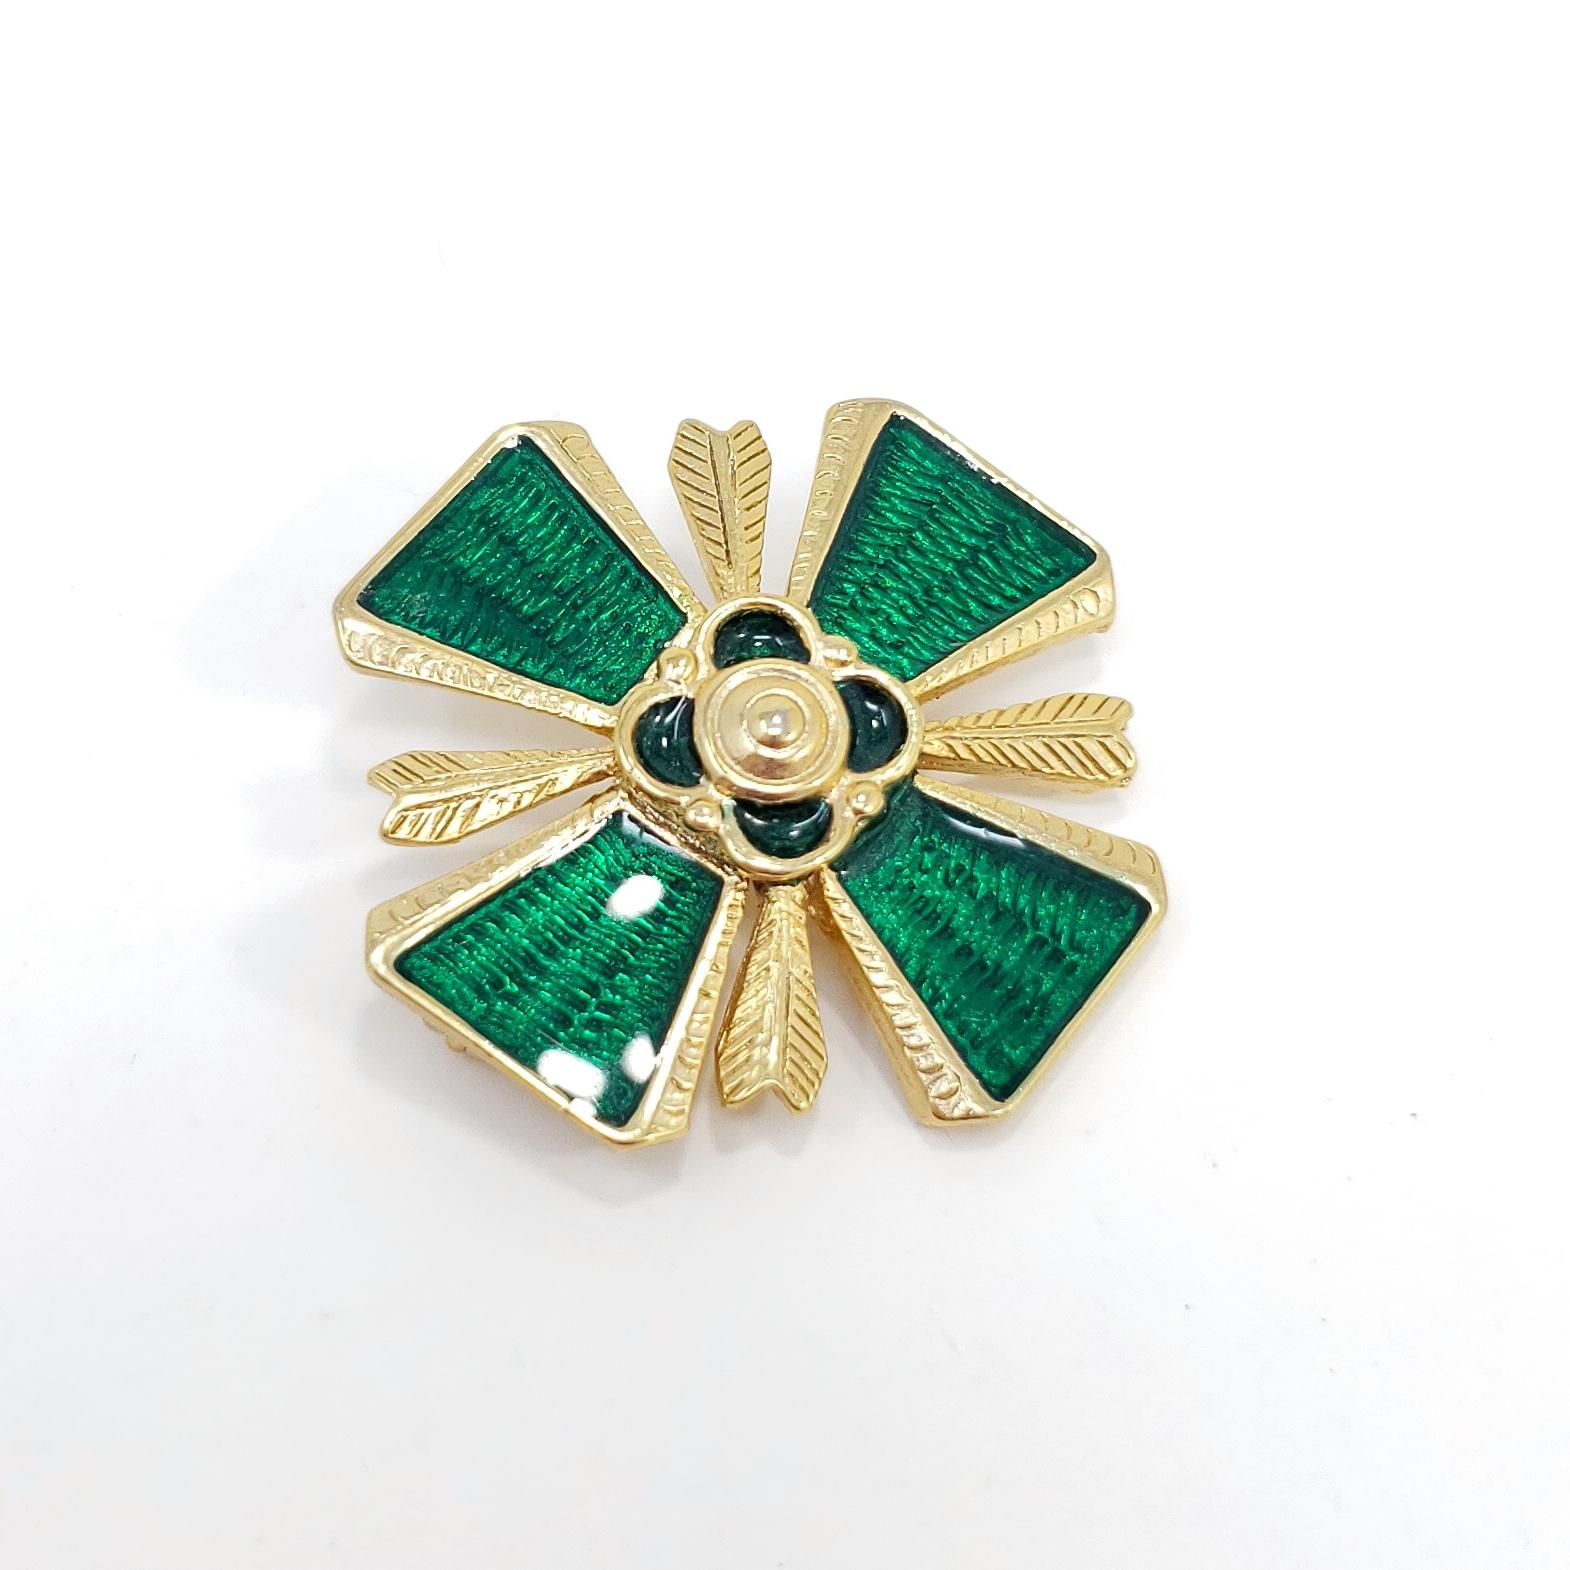 A stylish retro pin, featuring a maltese cross motifs painted with green enamel.

Gold-tone. Circa late 1900s.